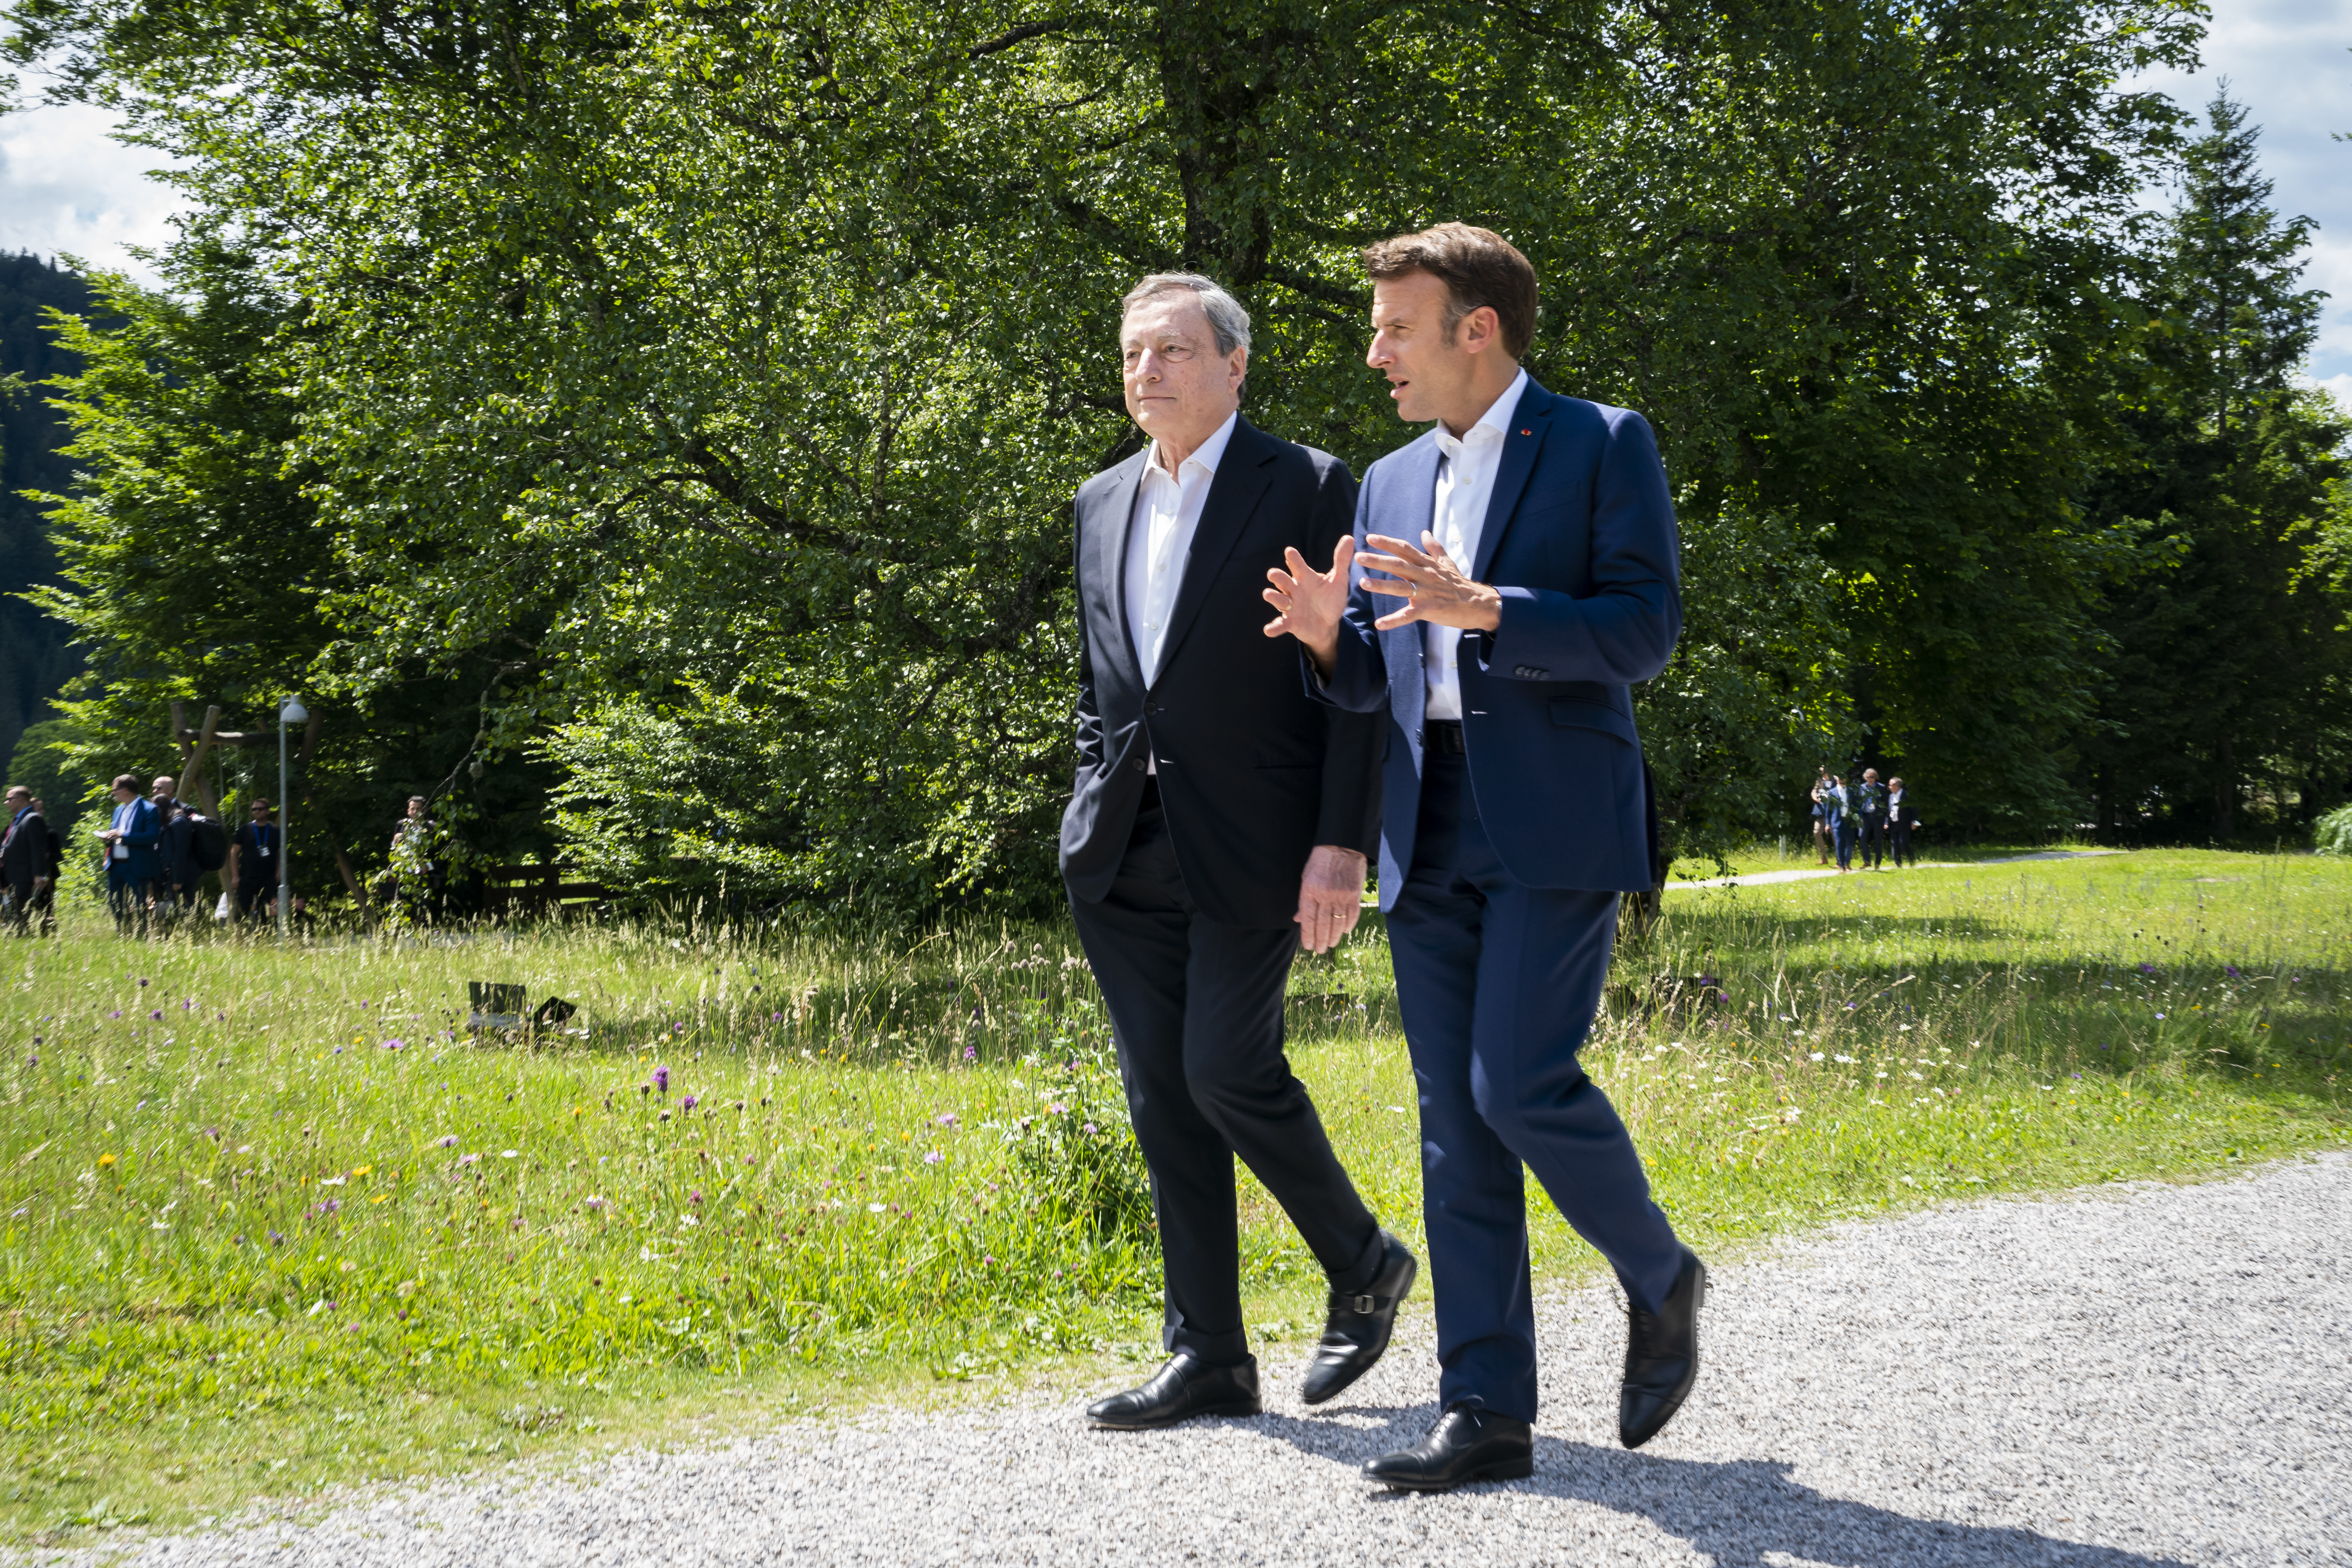 French President Emmanuel Macron and Italian Prime Minister Mario Draghi on their way to the family photo.